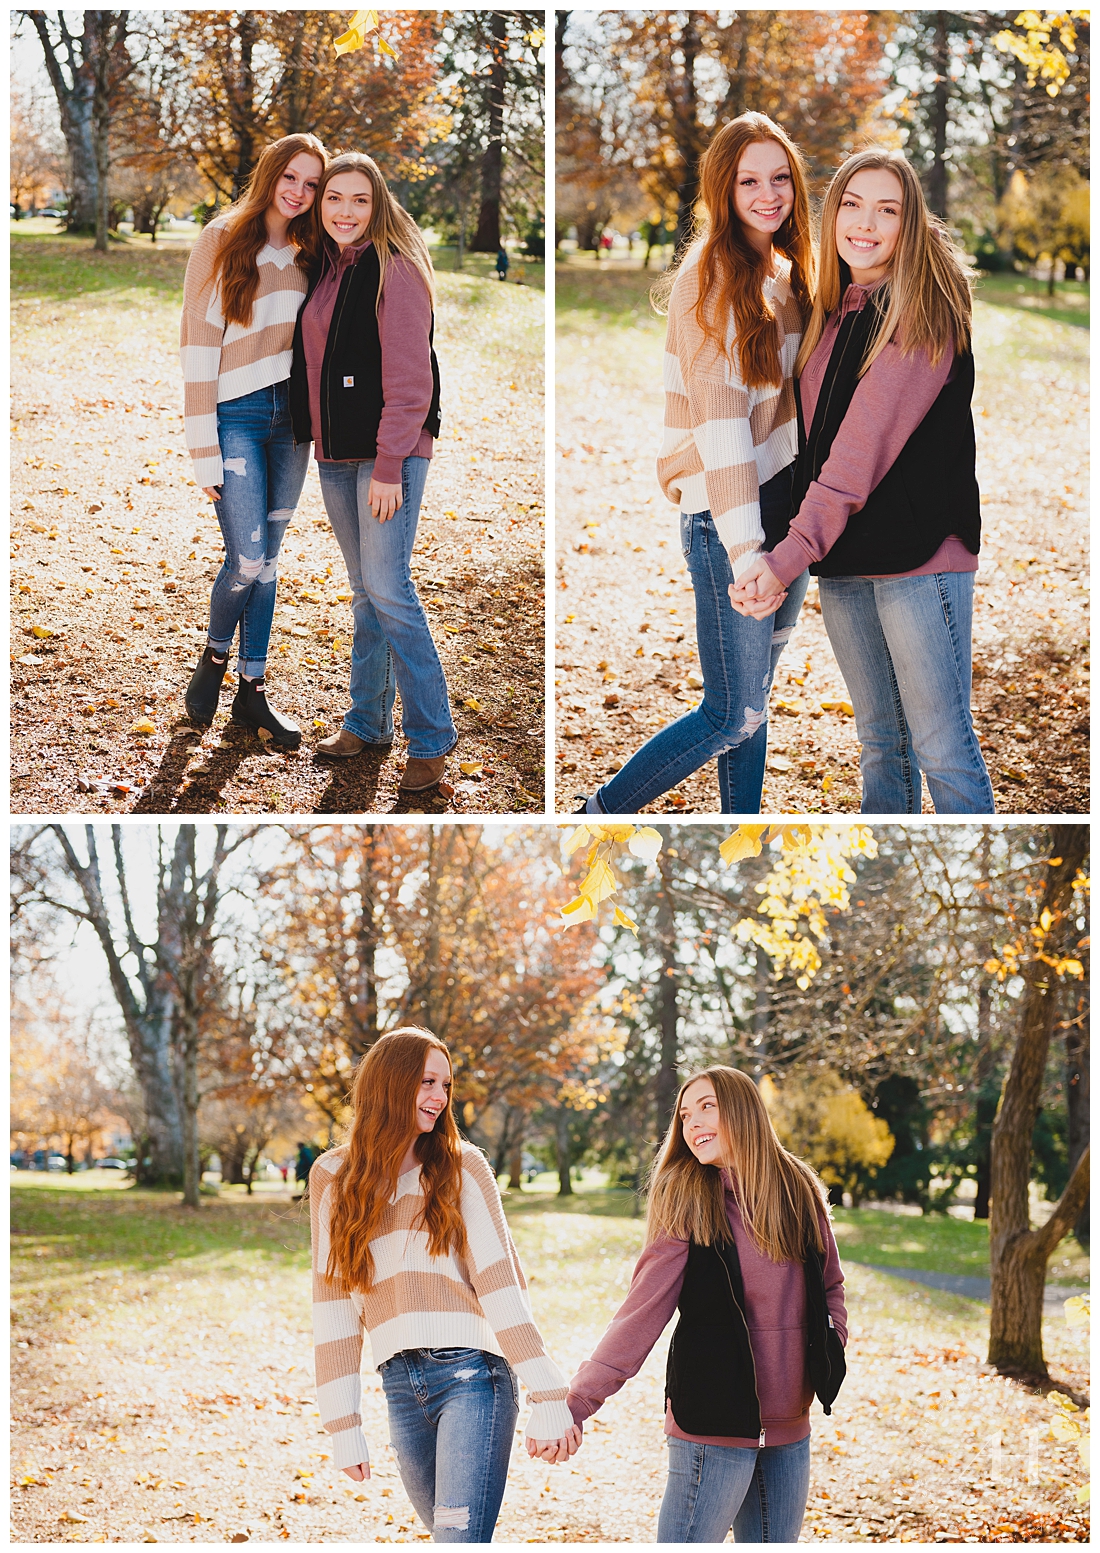 Cute BFF Portraits at Wright Park | Best Spots for Tacoma Senior Portraits, Outdoor Senior Portraits in Tacoma, Fall Leaves, Fall Colors, Outfits for Fall Senior Portraits, How to Layer for Senior Portraits | Photographed by the Best Tacoma Senior Photographer Amanda Howse